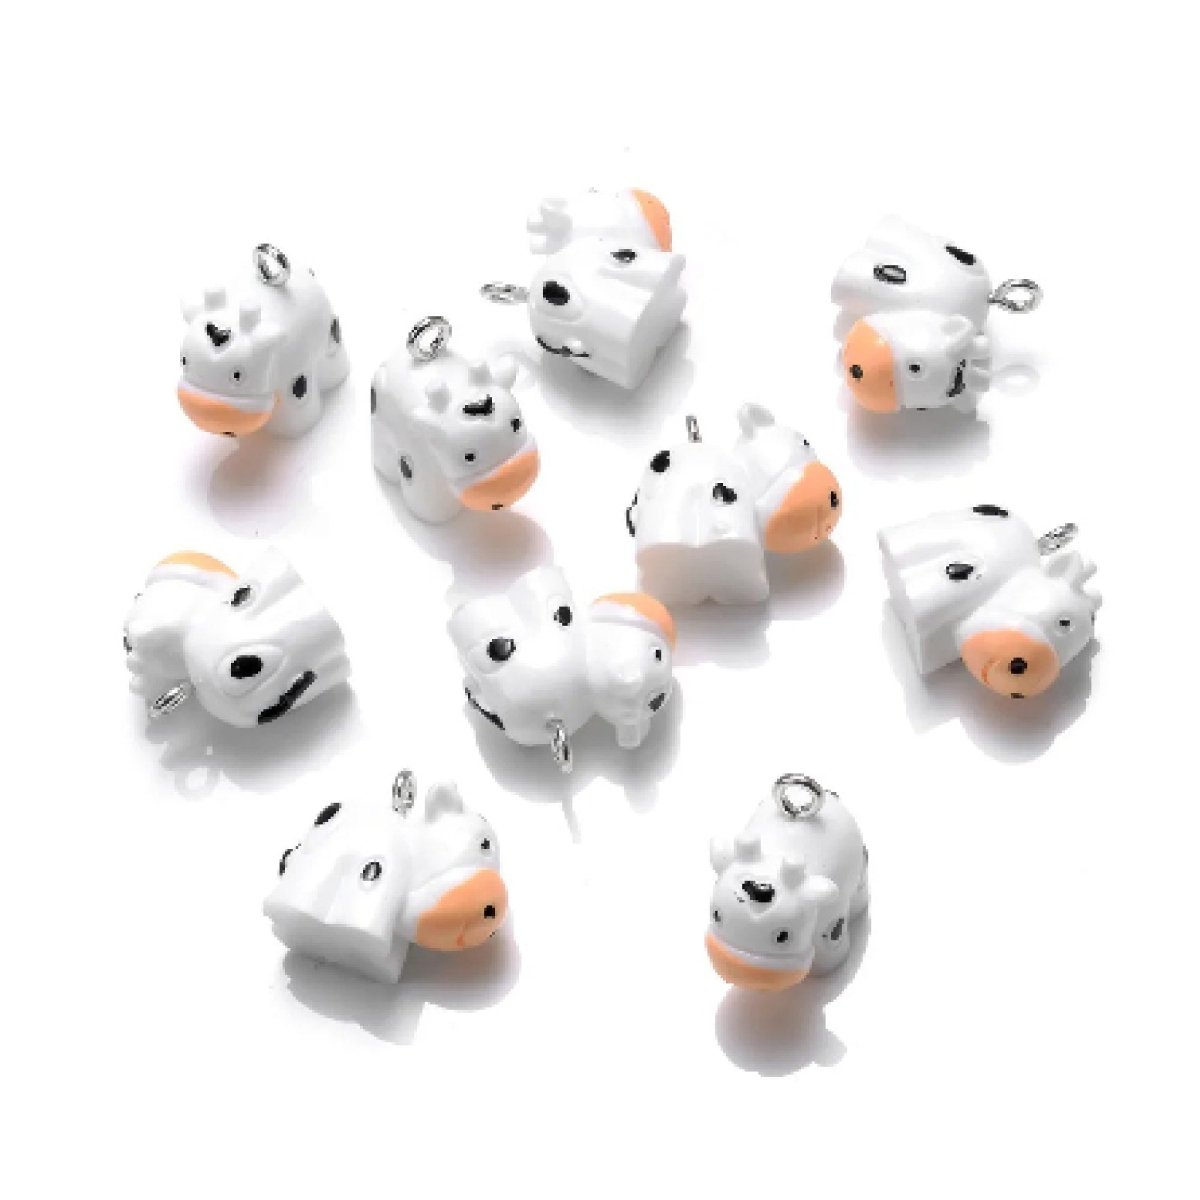 10pcs Miniature Mini Garden Animal Figurines Charms with Loop Pendant Craft - Cows - Asia Sell